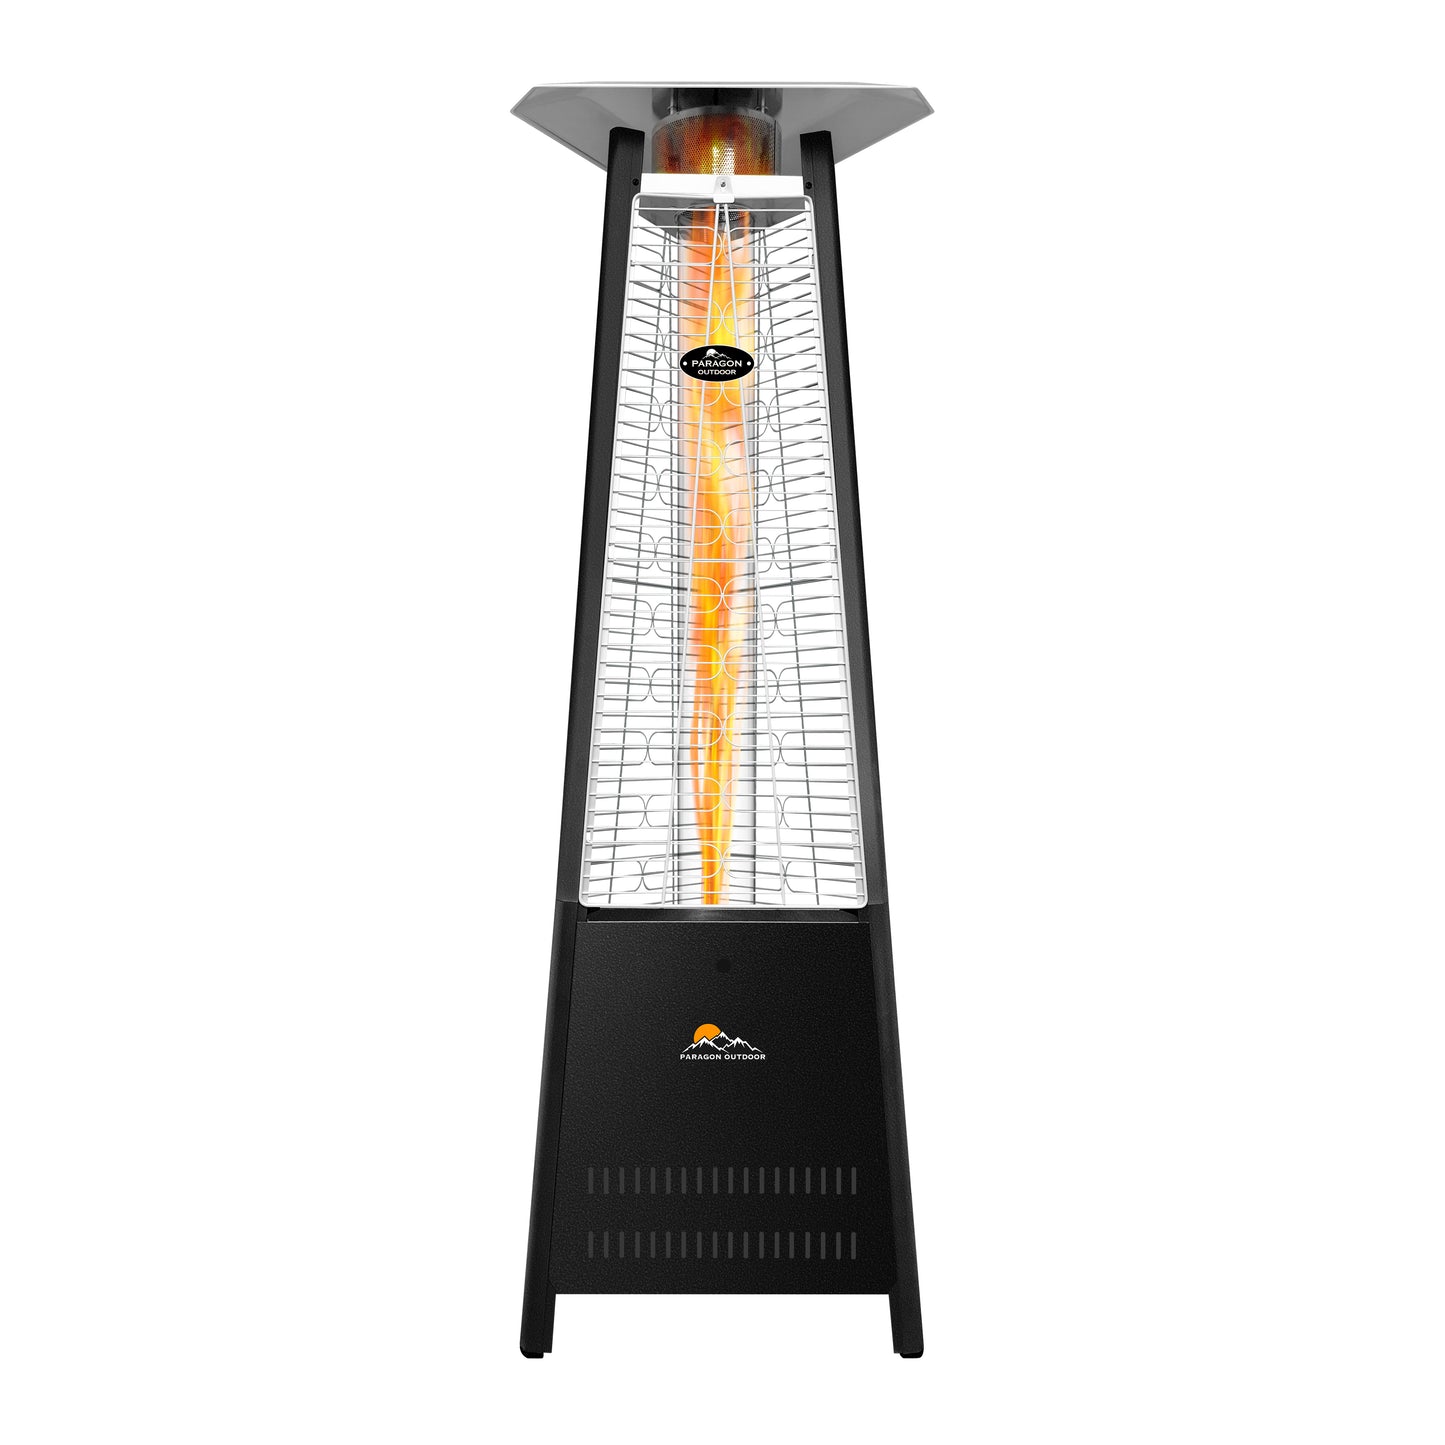 Inferno Boost Hammered Black Flame Tower Heater - 72.5”, 42,000 BTUs - Propane